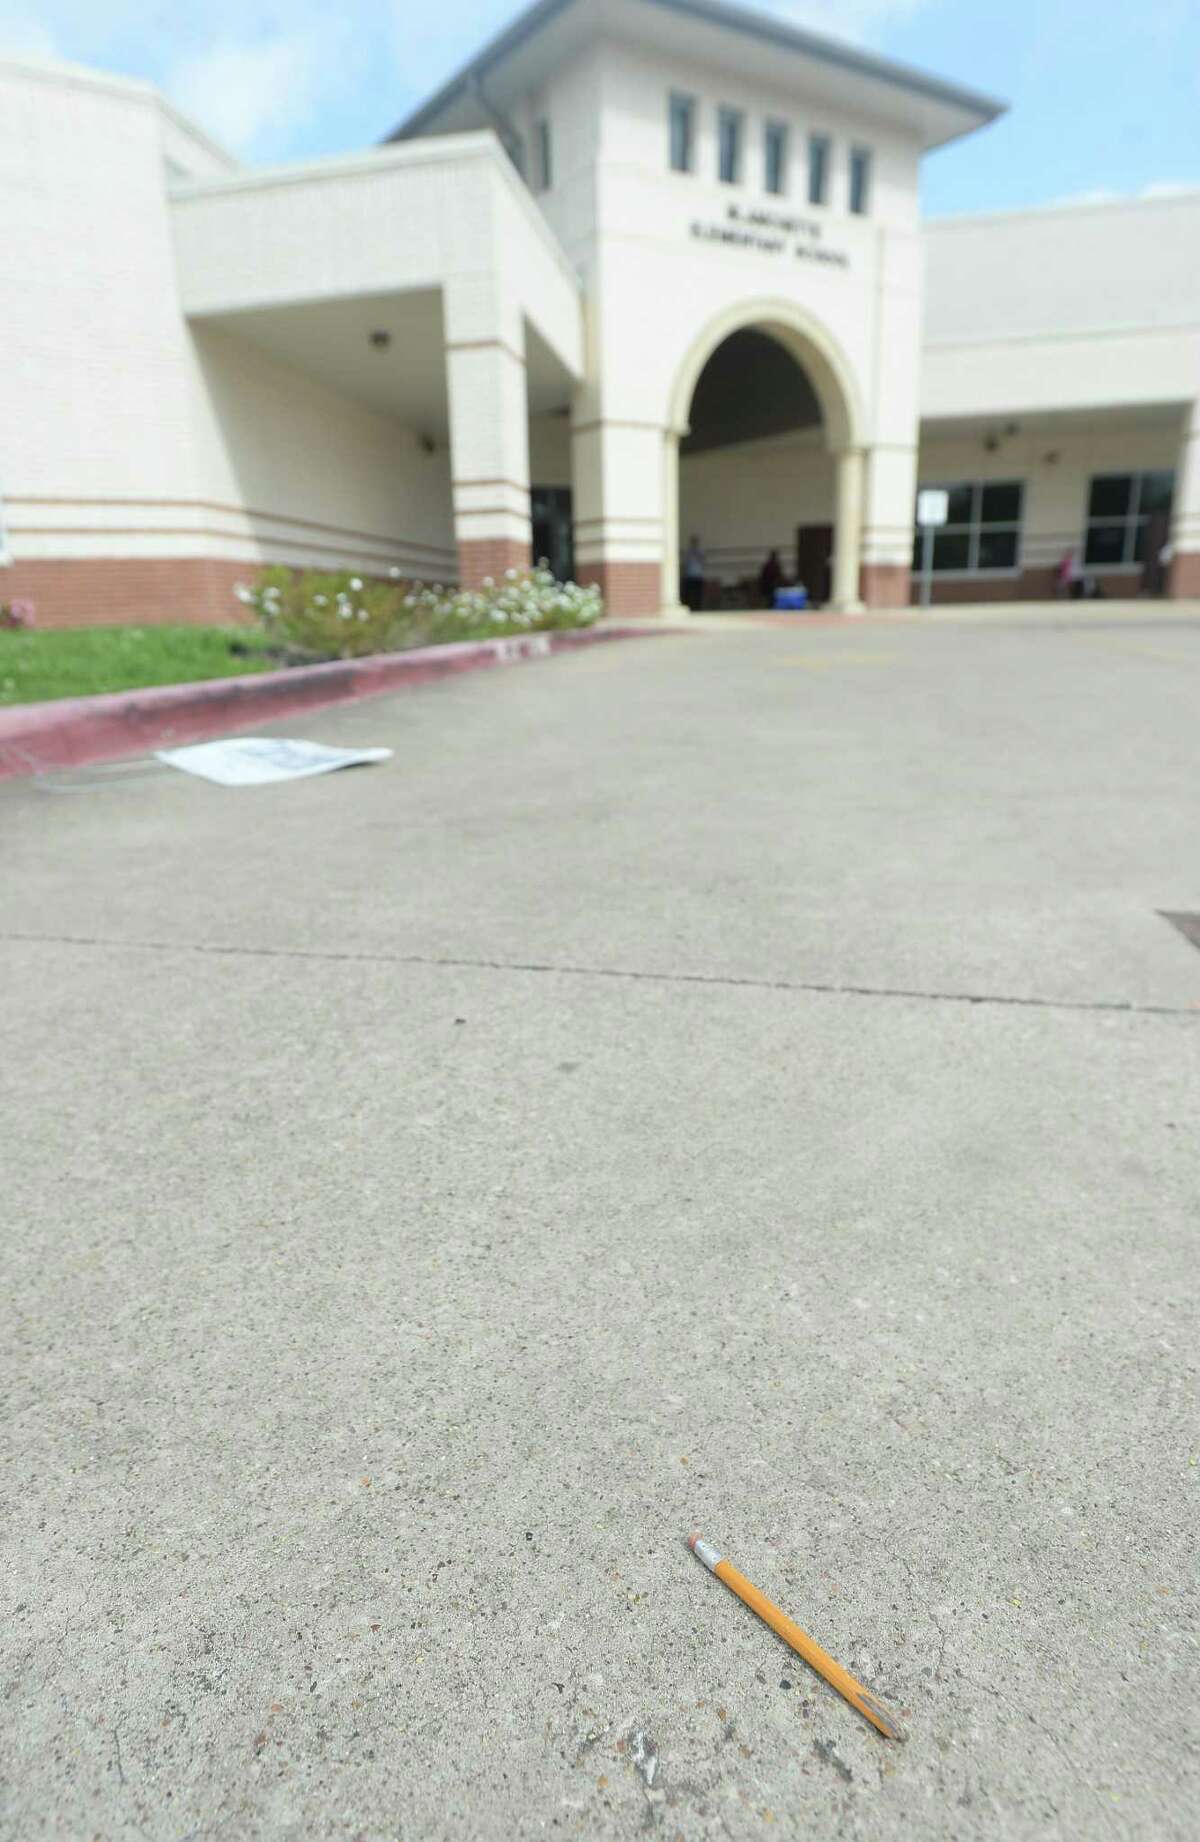 A lone pencil lies inn the drive at Blanchette Elementary School Tuesday, which was the first day of food distribution for Beaumont children. Photo taken Tuesday, March 24, 2020 Kim Brent/The Enterprise